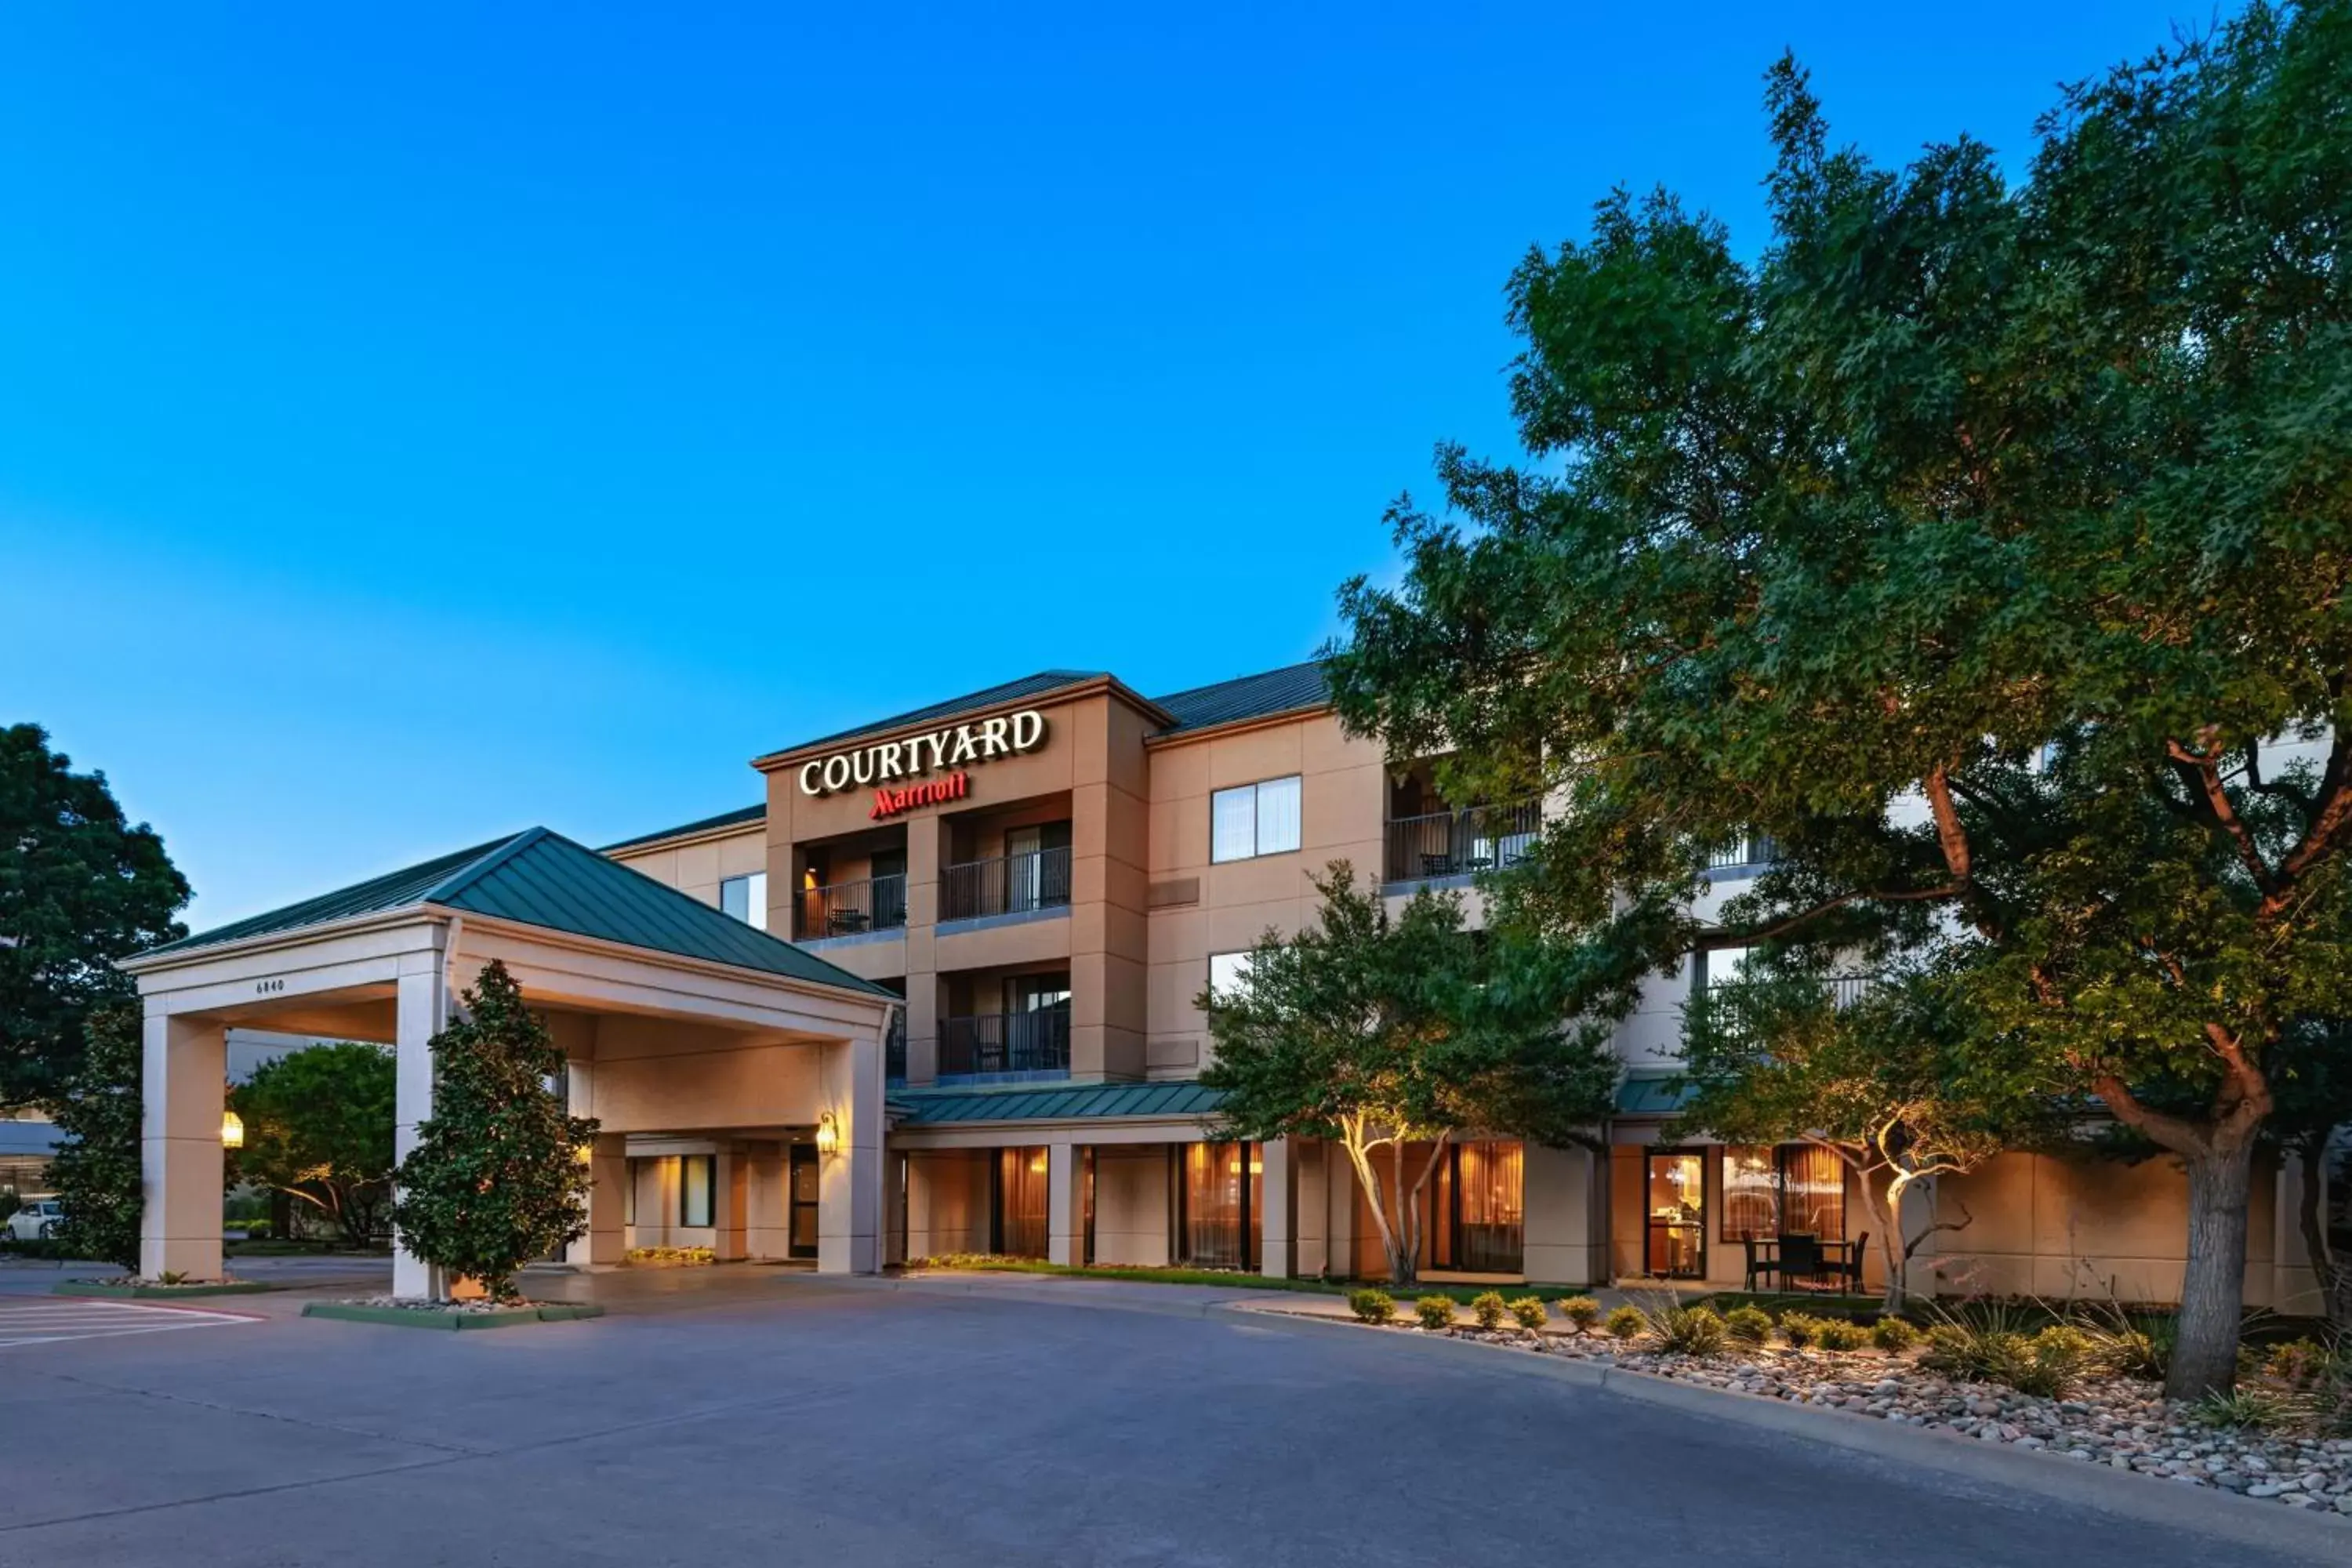 Property Building in Courtyard by Marriott Dallas Plano in Legacy Park